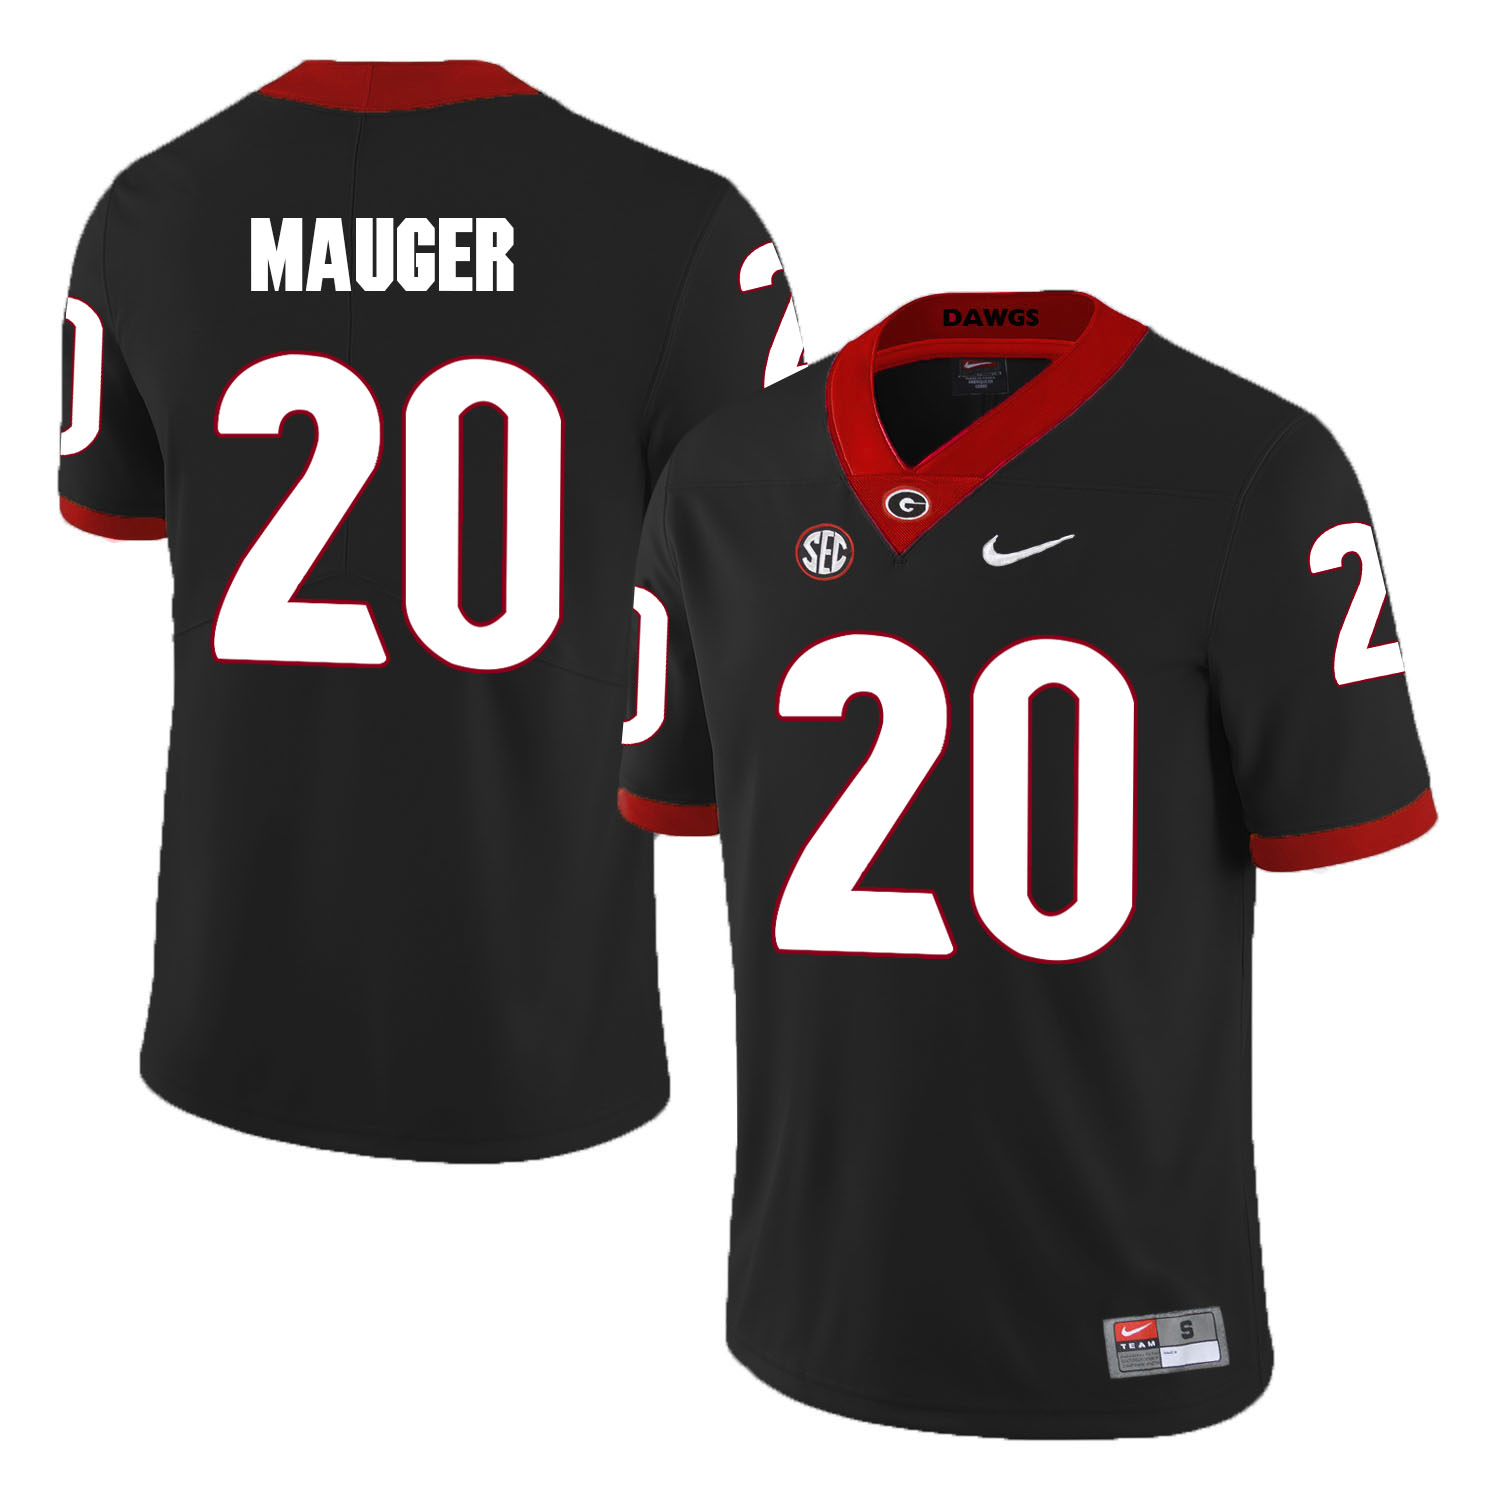 Georgia Bulldogs 20 Quincy Mauger Black College Football Jersey